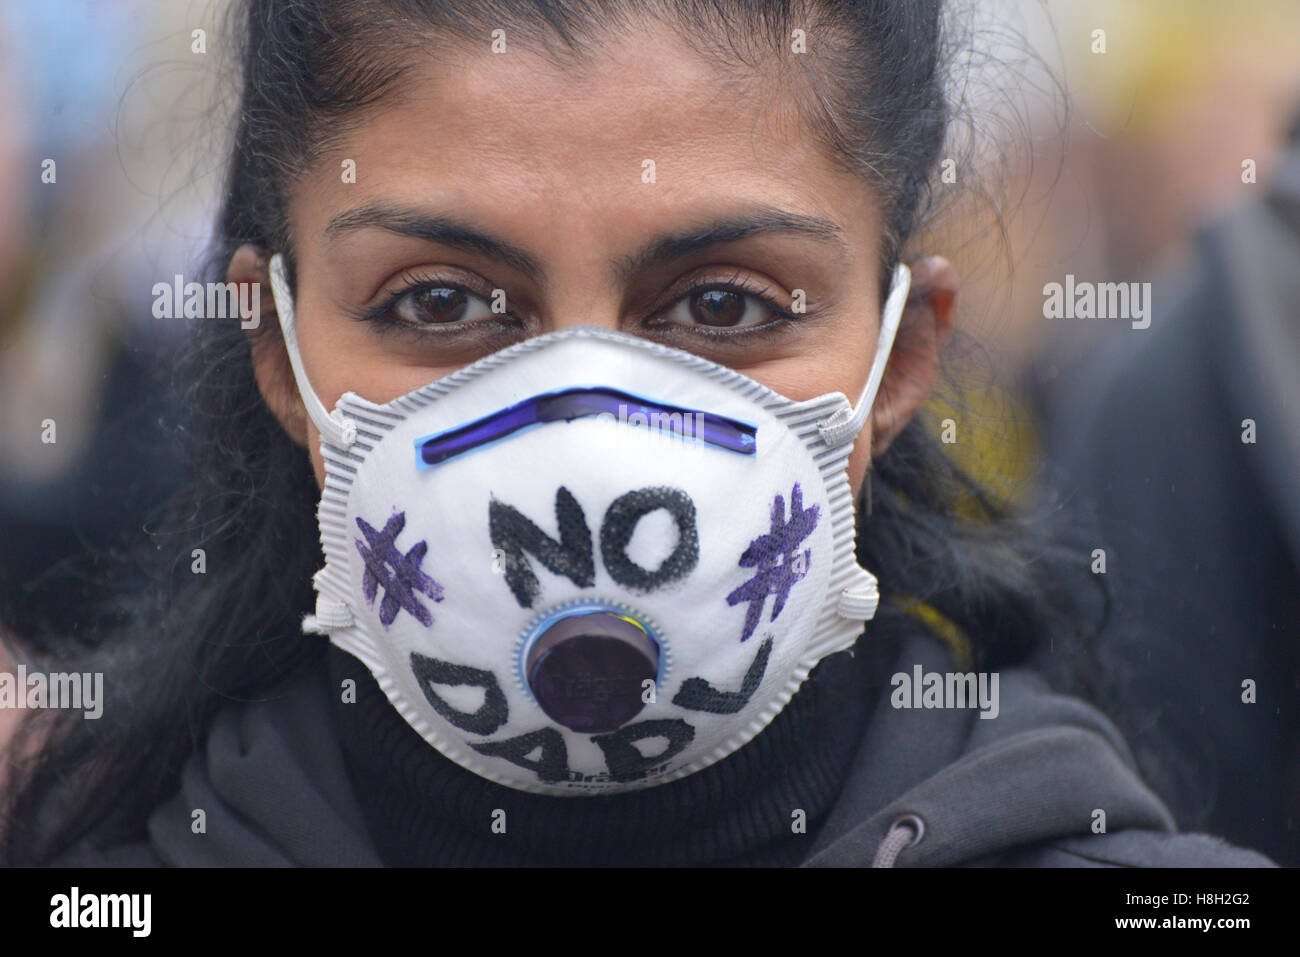 Manchester, UK. 12th Nov, 2016. A person wears a face mask to highlight the cause of 'No DAPL' - a reference to the Dakota Access Pipeline during the pre-demonstration rally against hydraulic fracturing, also known as 'fracking', on November 12, 2016 in Manchester, England. Credit:  Jonathan Nicholson/Alamy Live News Stock Photo